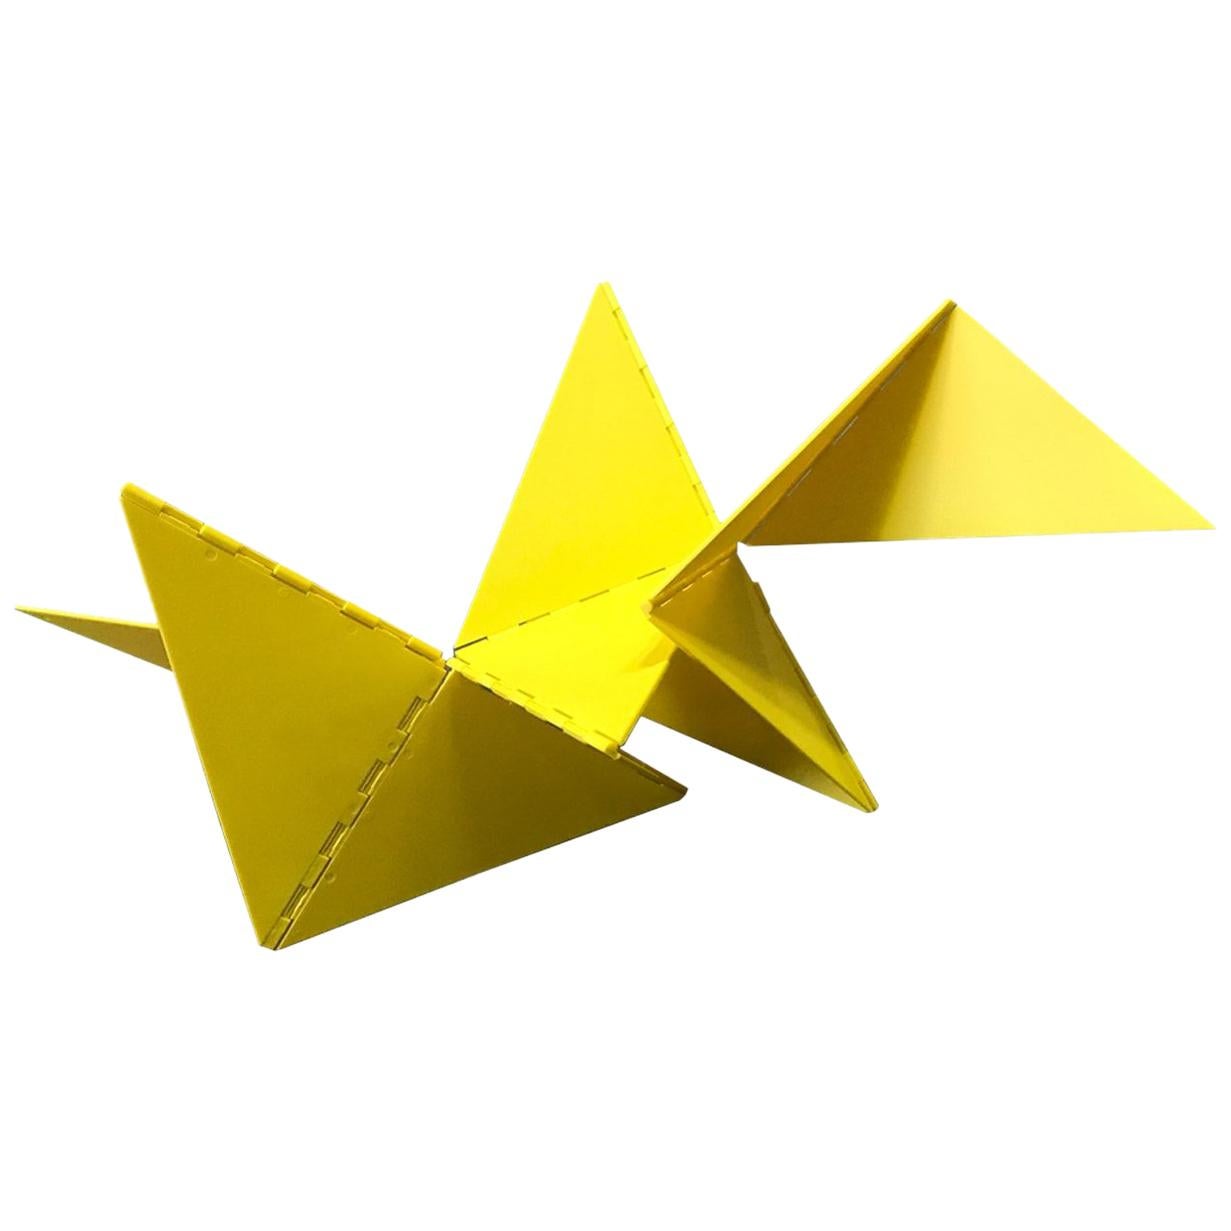 Lygia Clark Linear Critter Yellow Plastic Reproduction For Sale